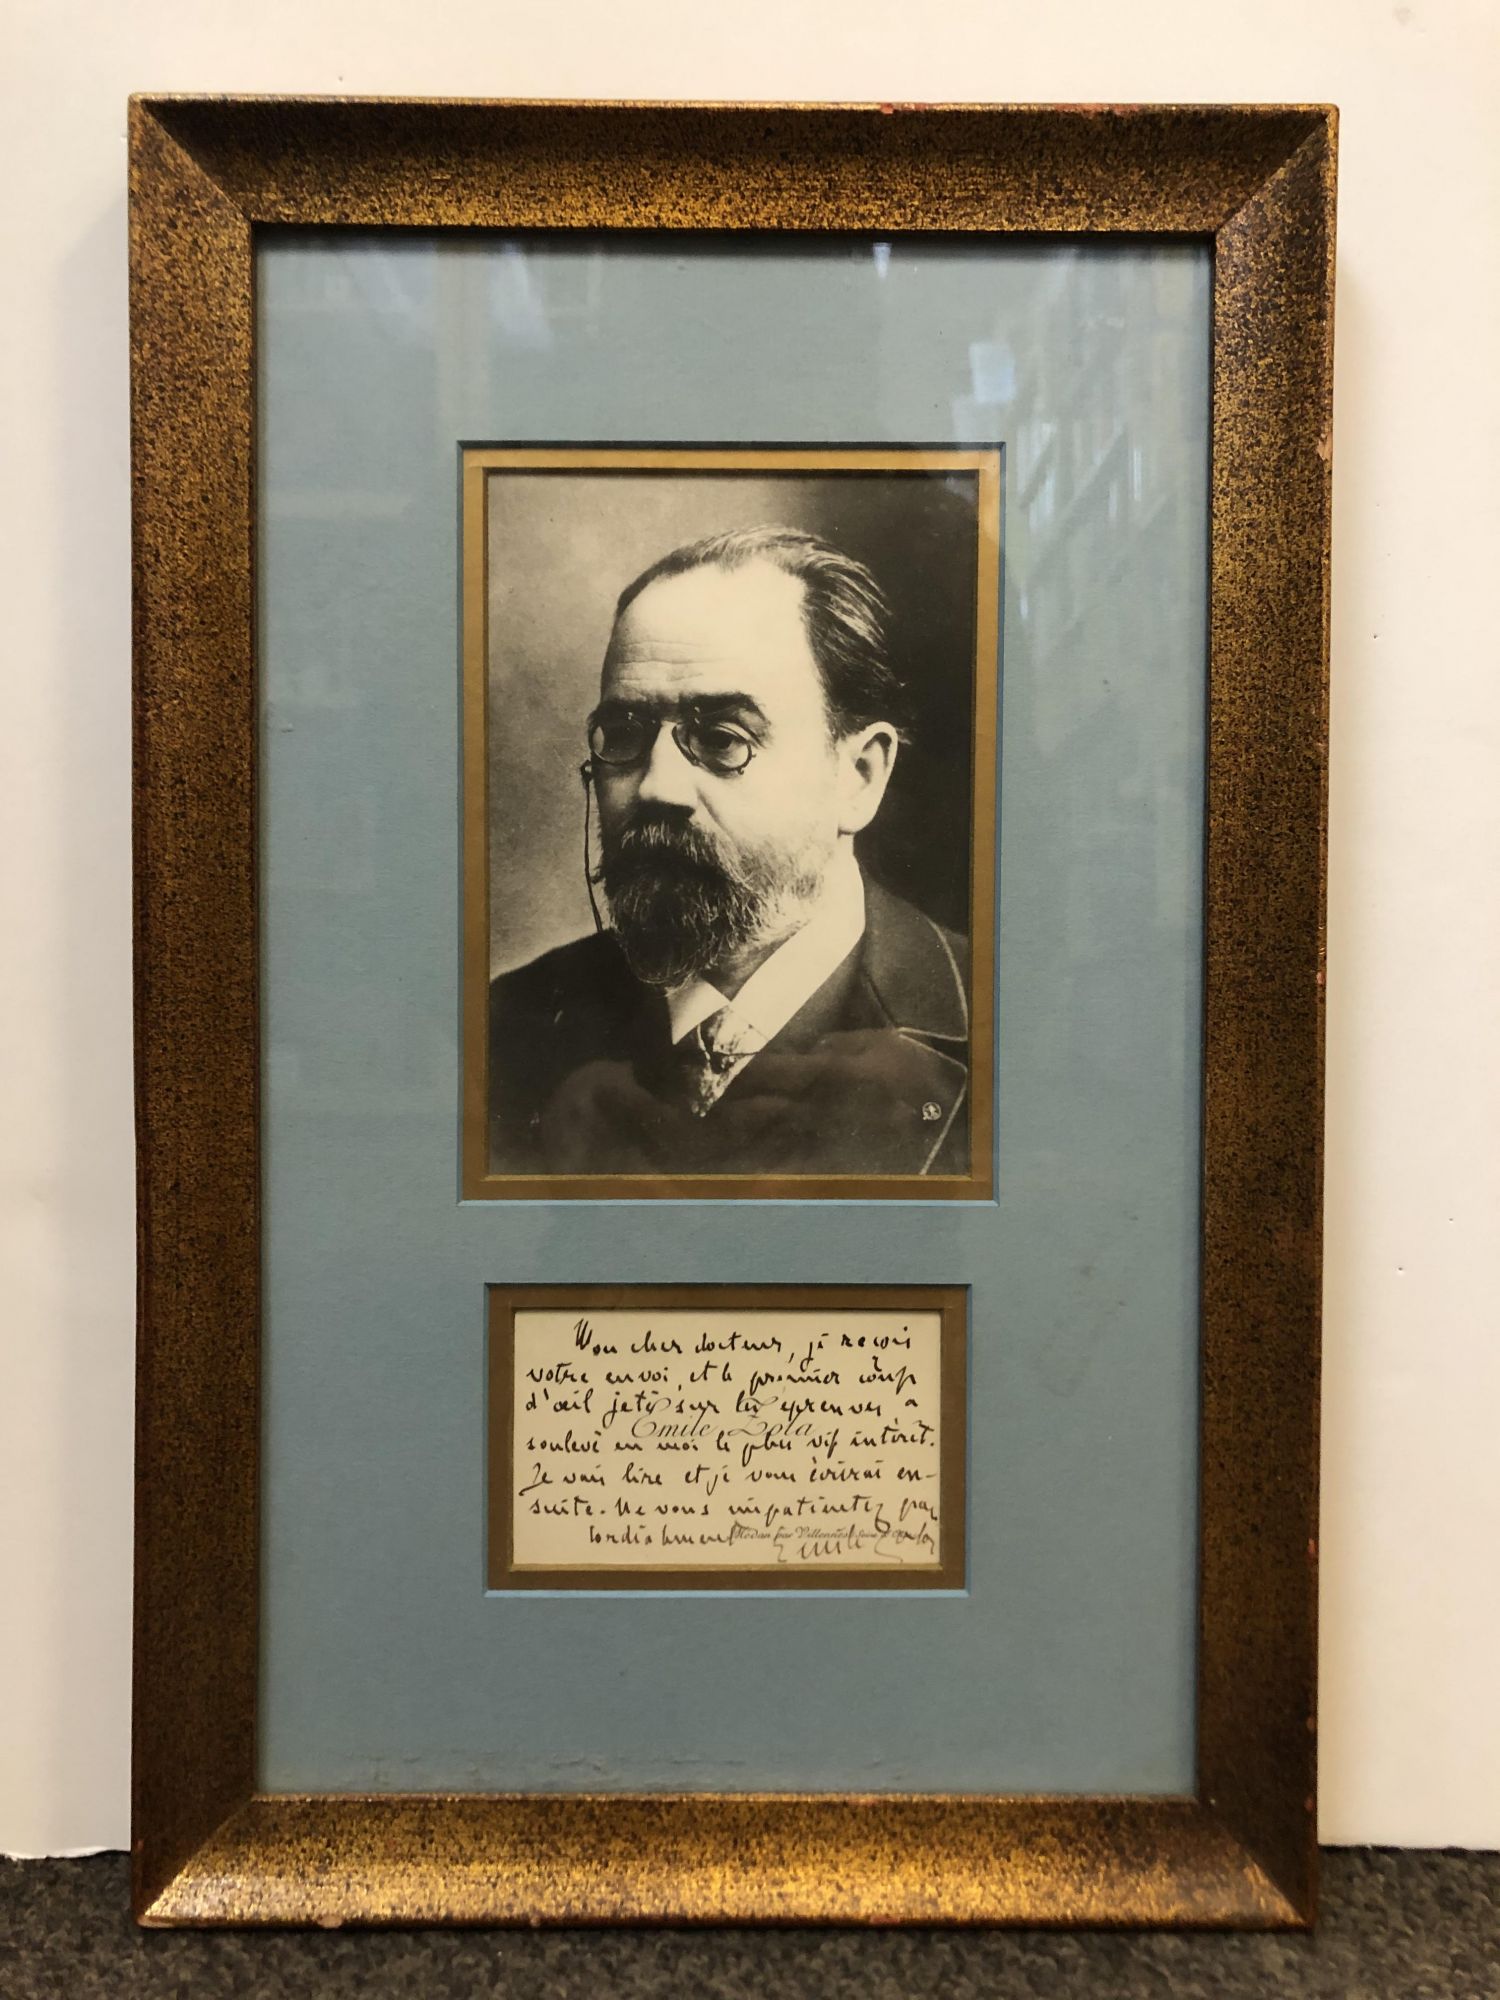 LETTER AND PHOTOGRAPH OF EMILE ZOLA